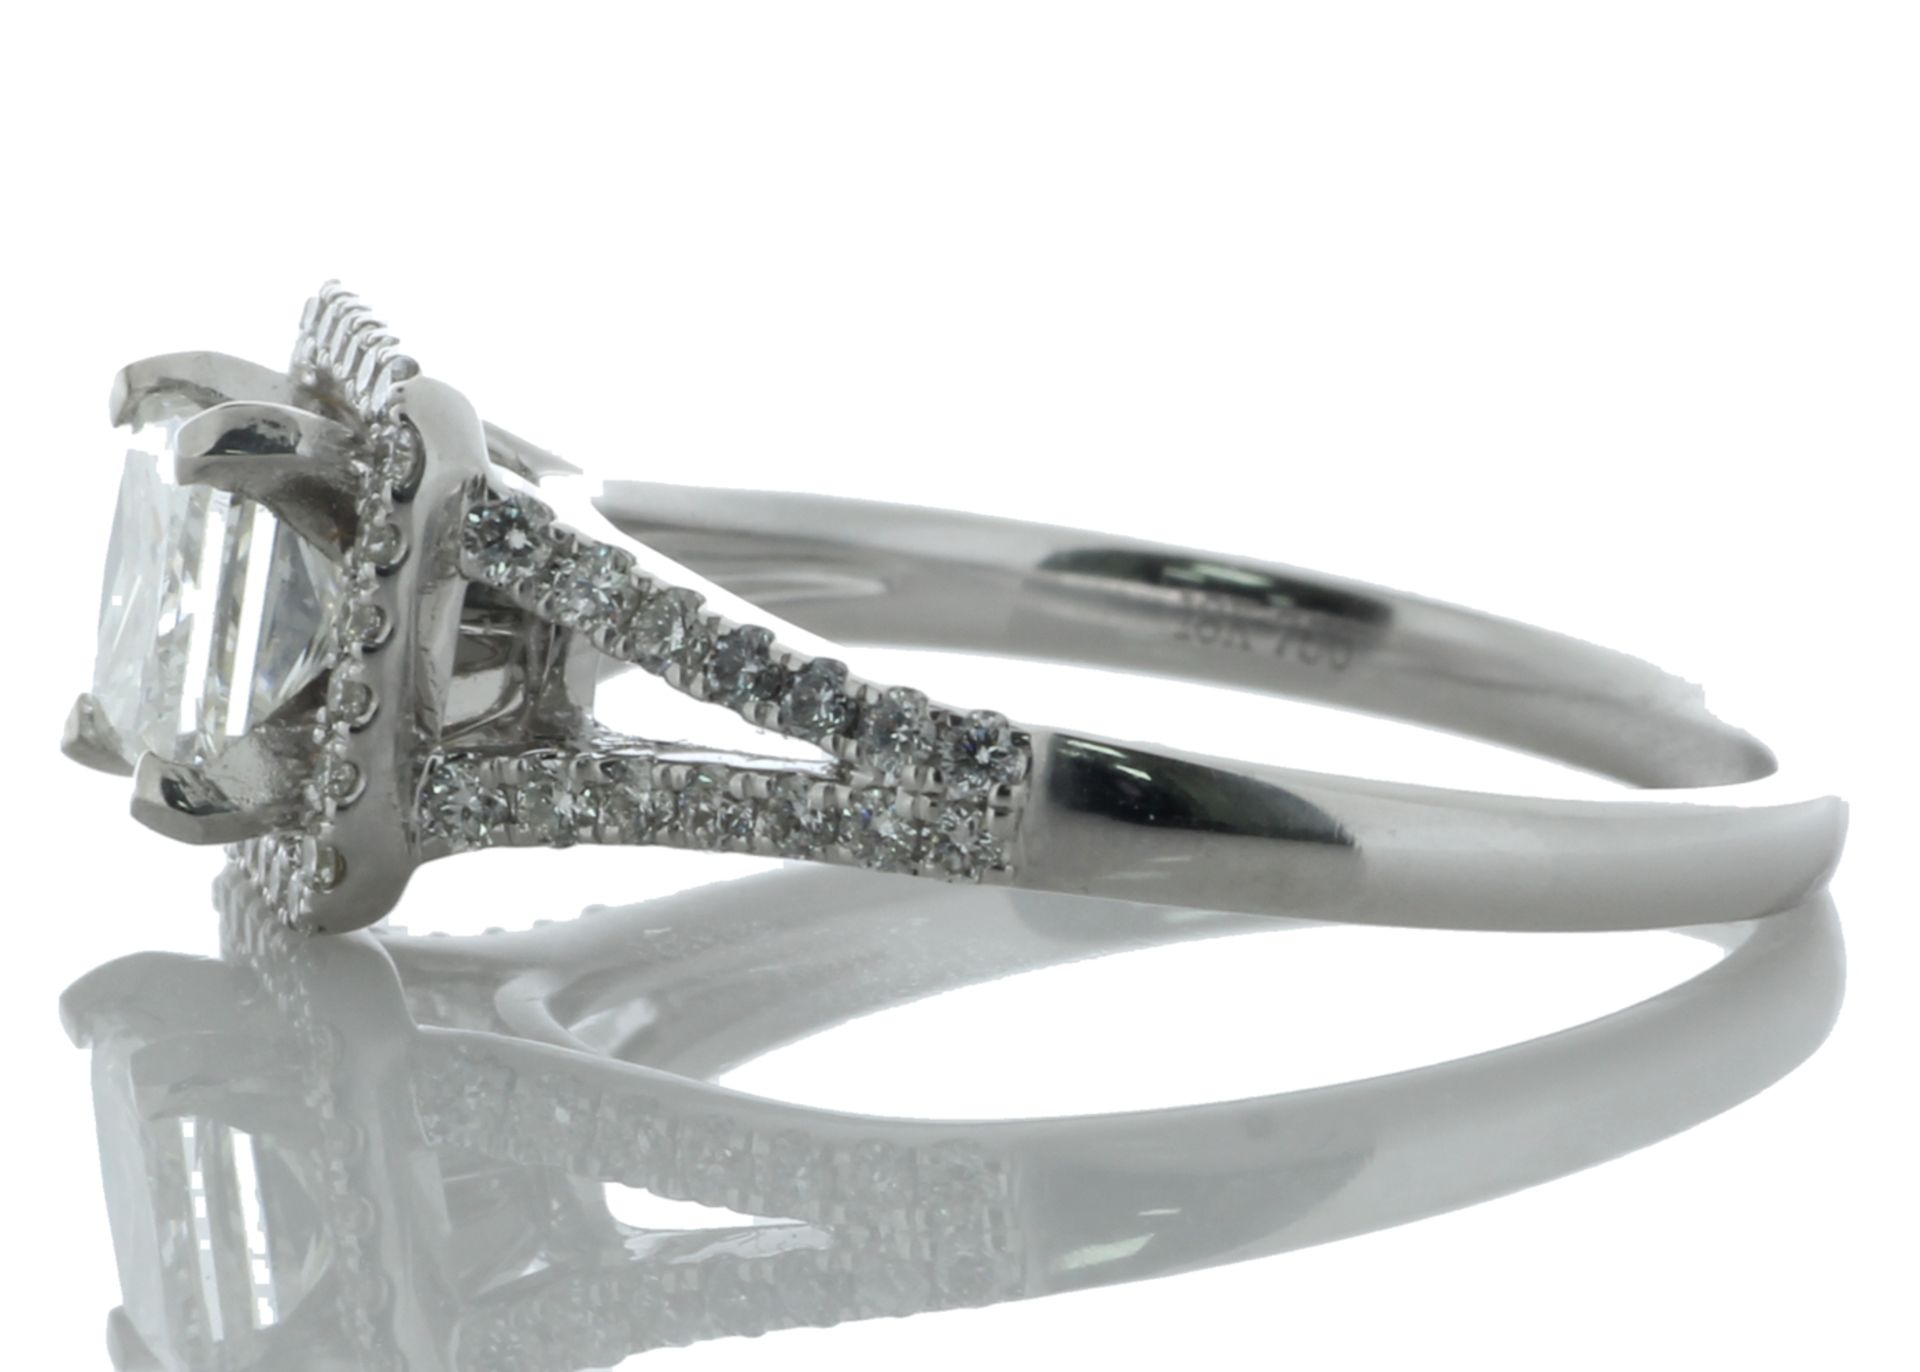 18ct White Gold Single Stone Princess Cut Diamond Ring (0.72) 1.05 Carats - Valued by GIE £15,497.00 - Image 2 of 5